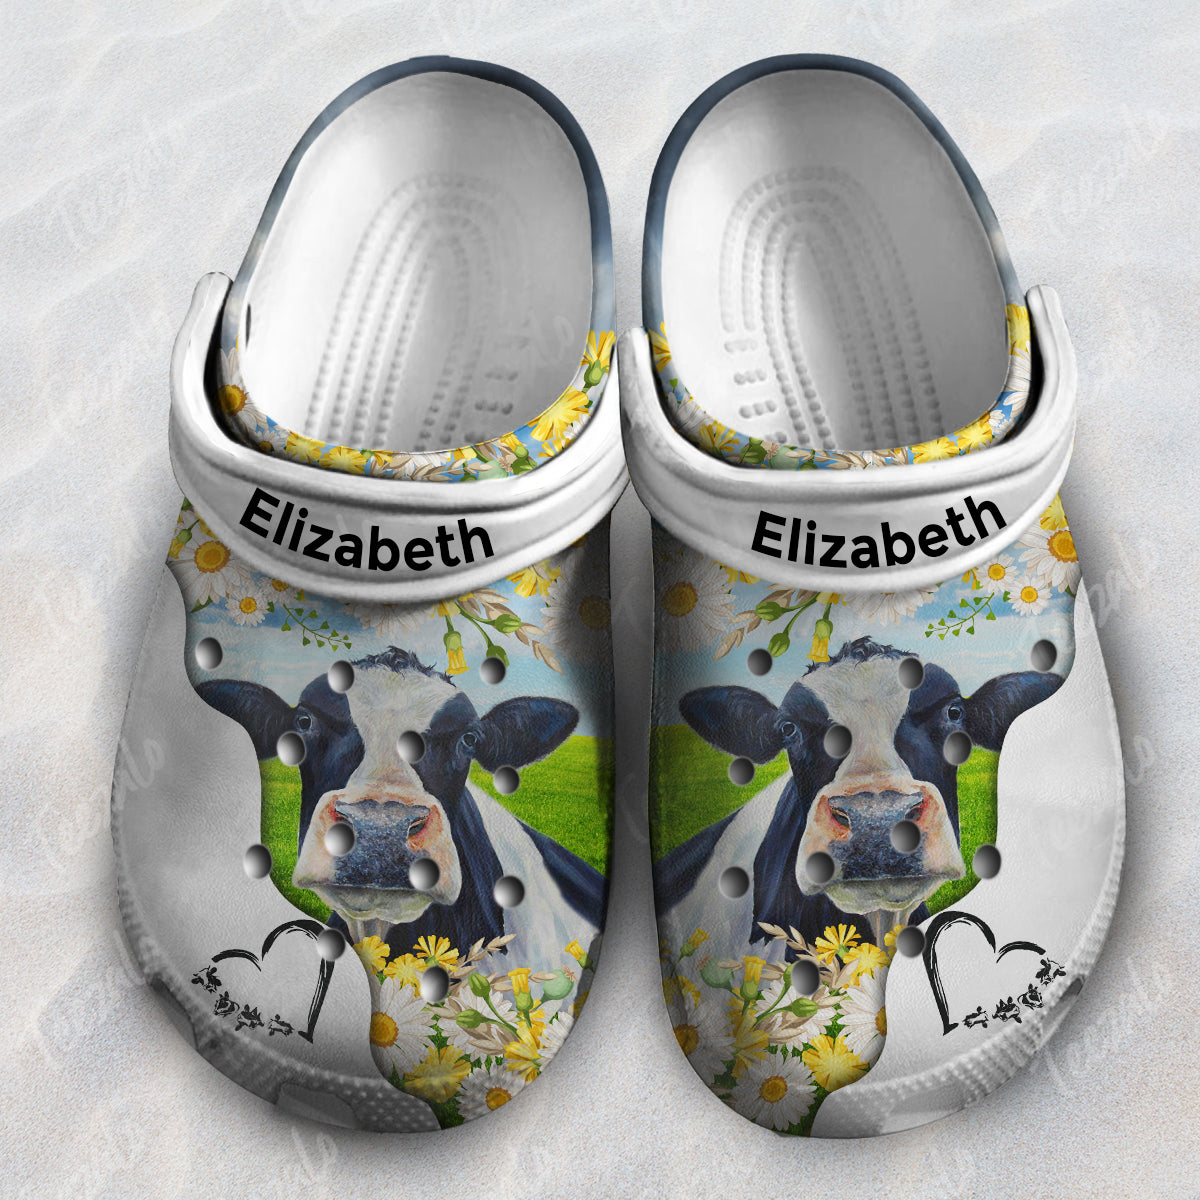 Cow Heart Personalized Clogs Shoes With Your Name, Cow Clog Shoes